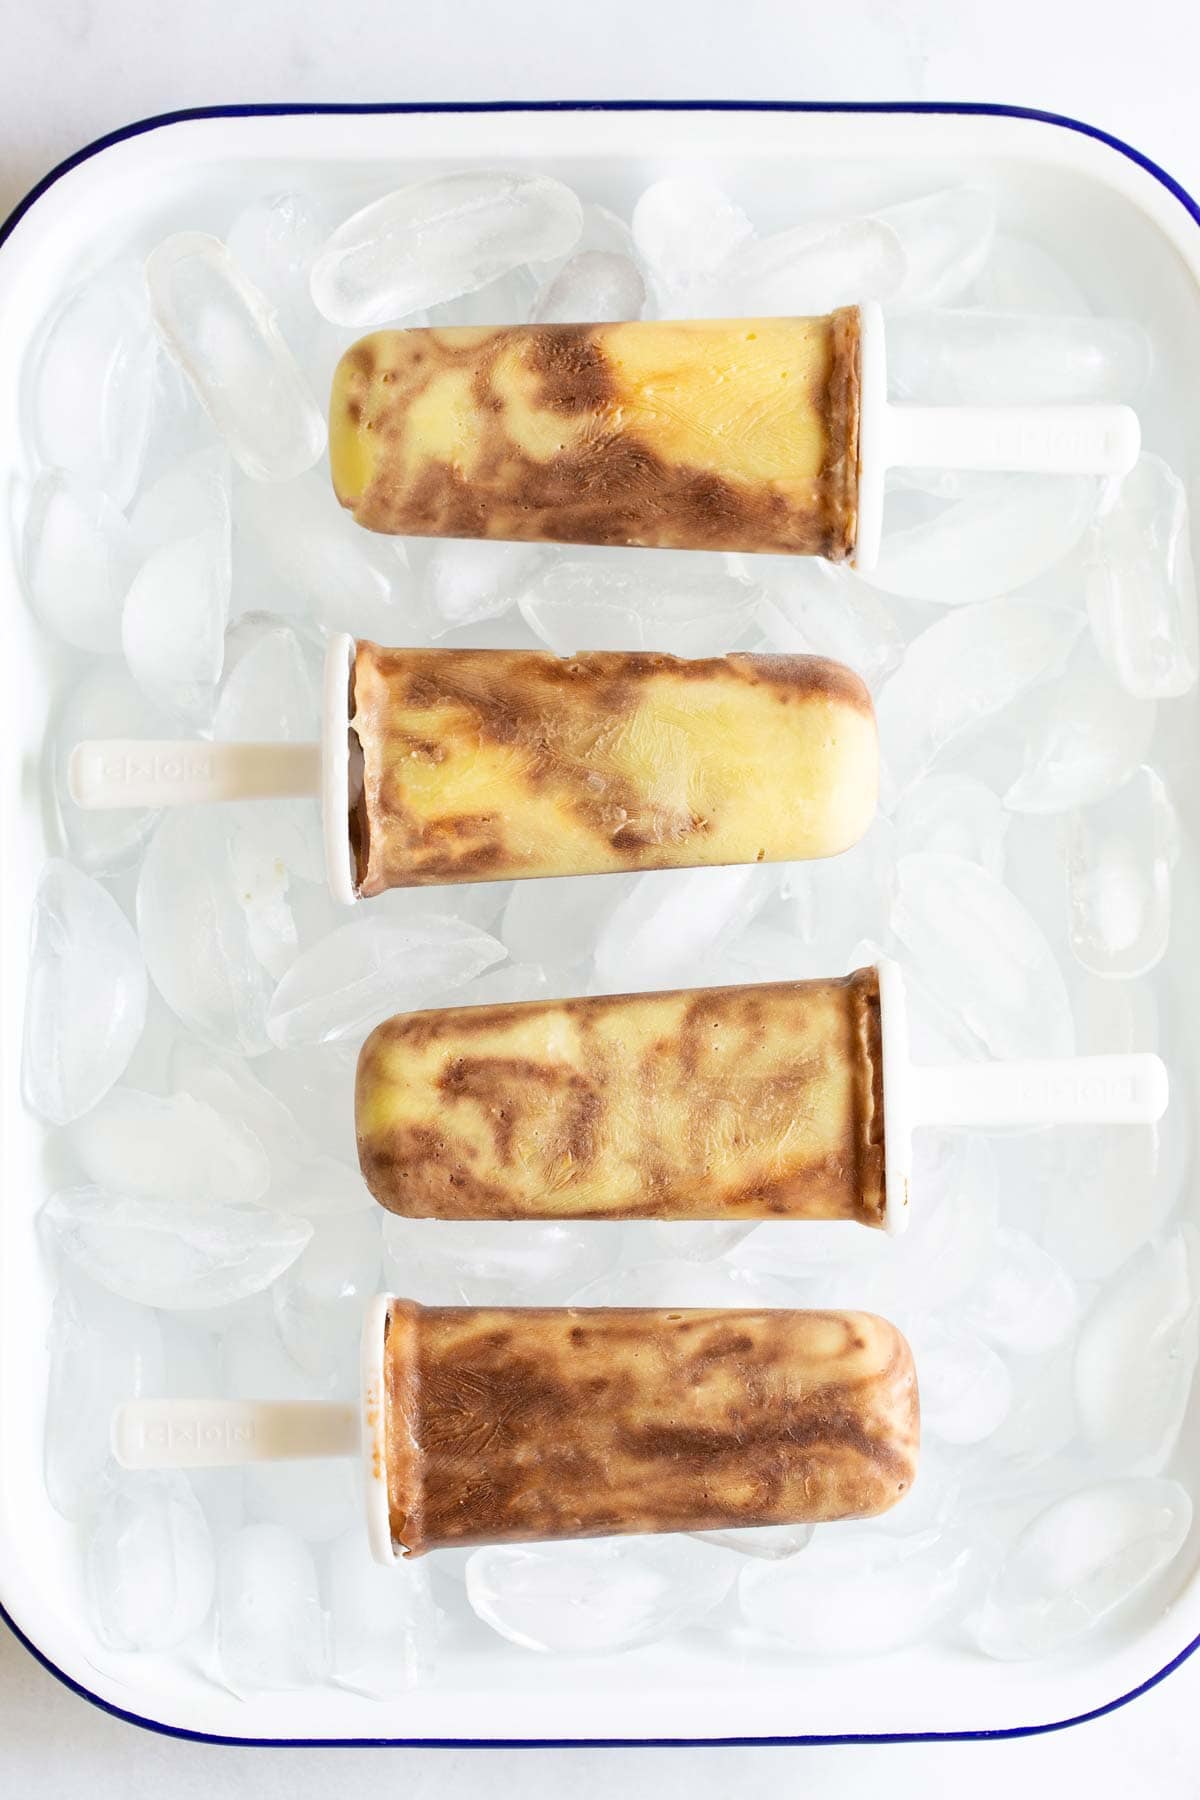 A tray with four chocolate and vanilla swirled popsicles is placed on a bed of ice.